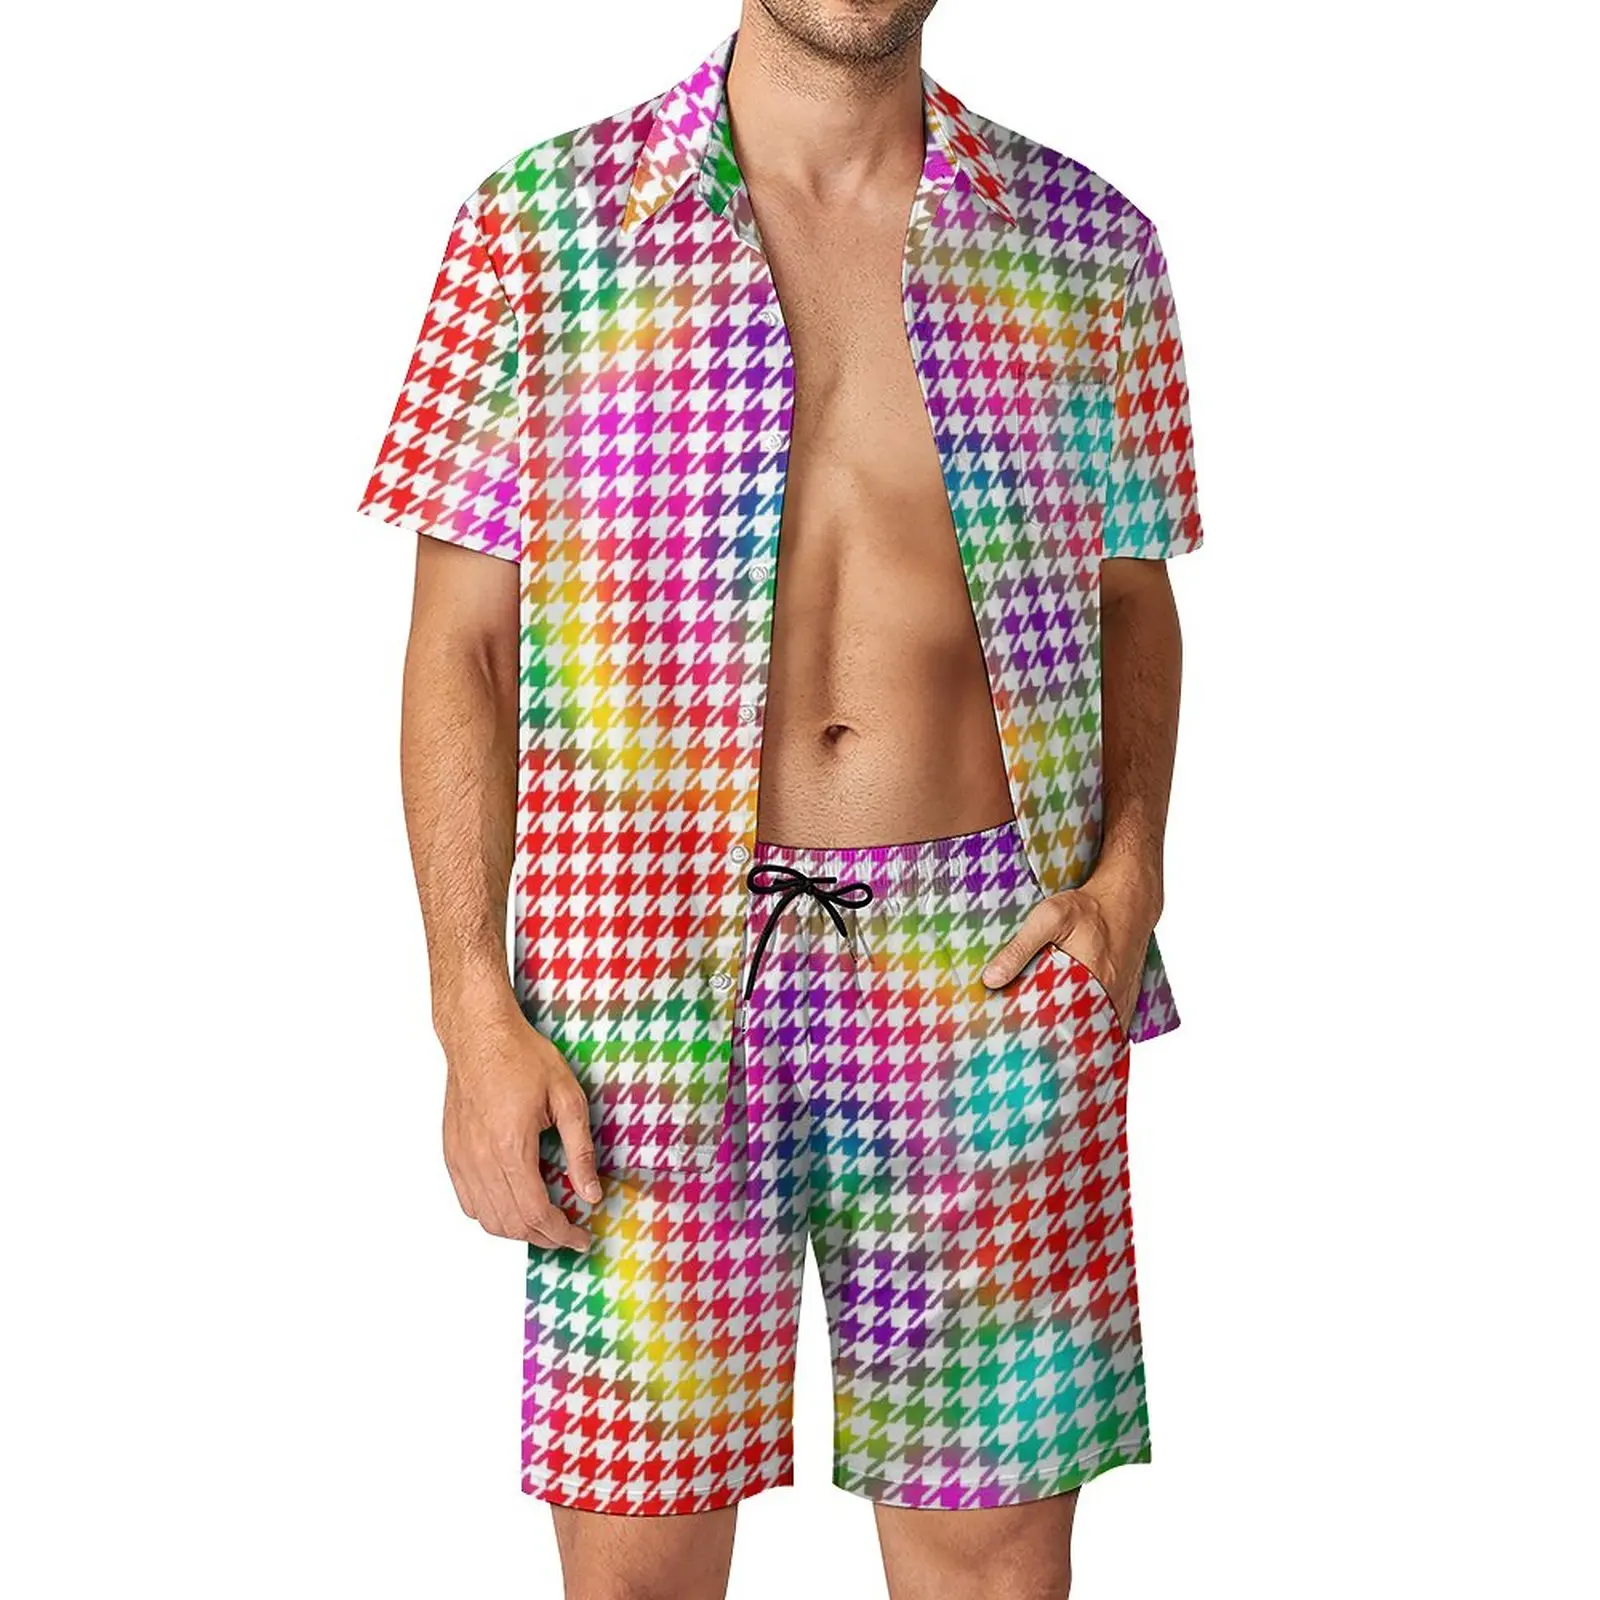 

Houndstooth Psychedelic Beach Men Sets Colorful Print Casual Shirt Set Summer Design Shorts 2 Piece Fashion Suit Plus Size 3XL